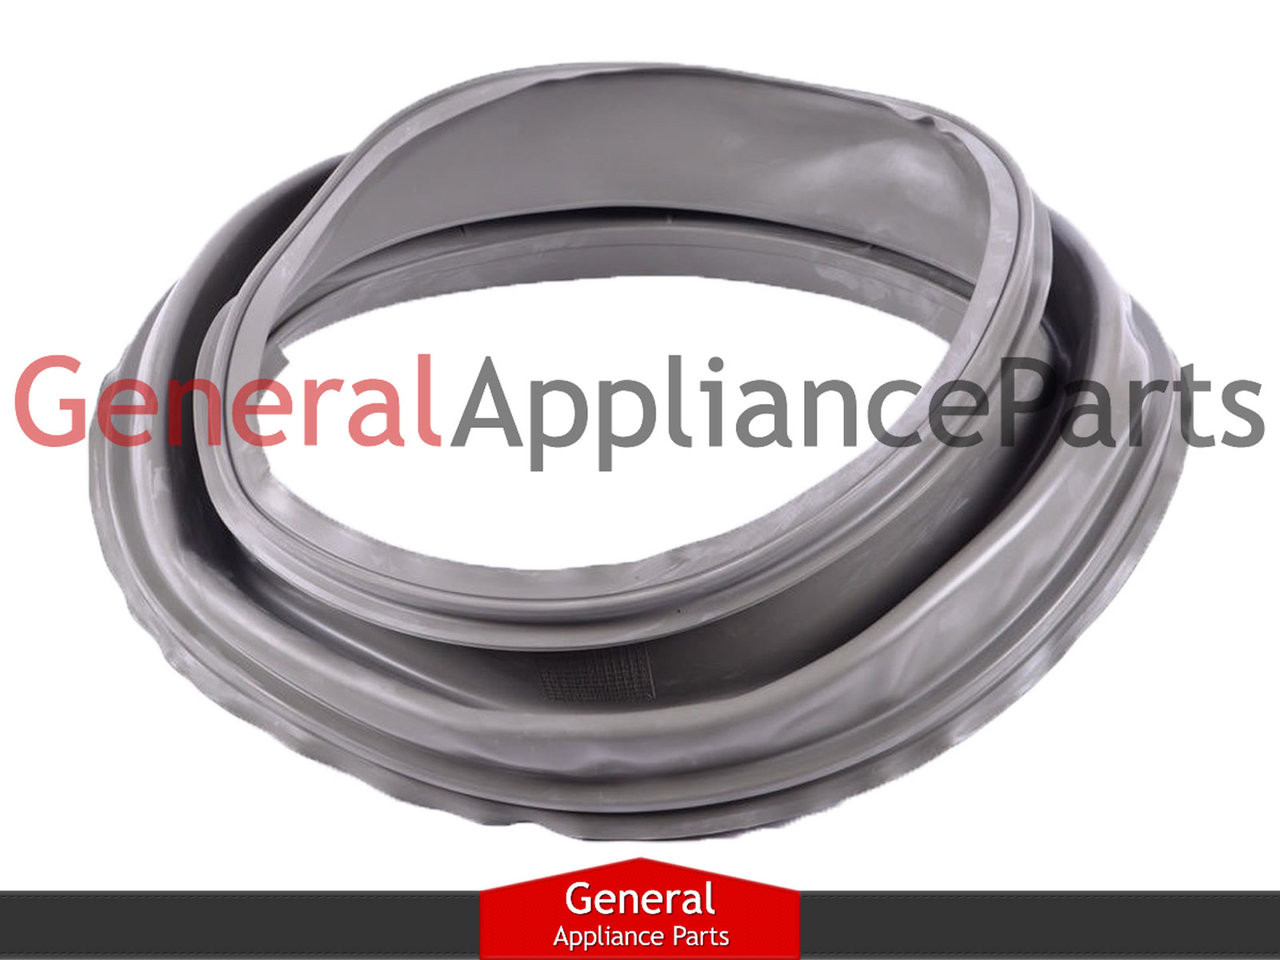 Details about   Washer Door Boot Seal Bellow For WFW8300SW04 WFW8300SW05 WFW8300SW00 WFW8300SW01 